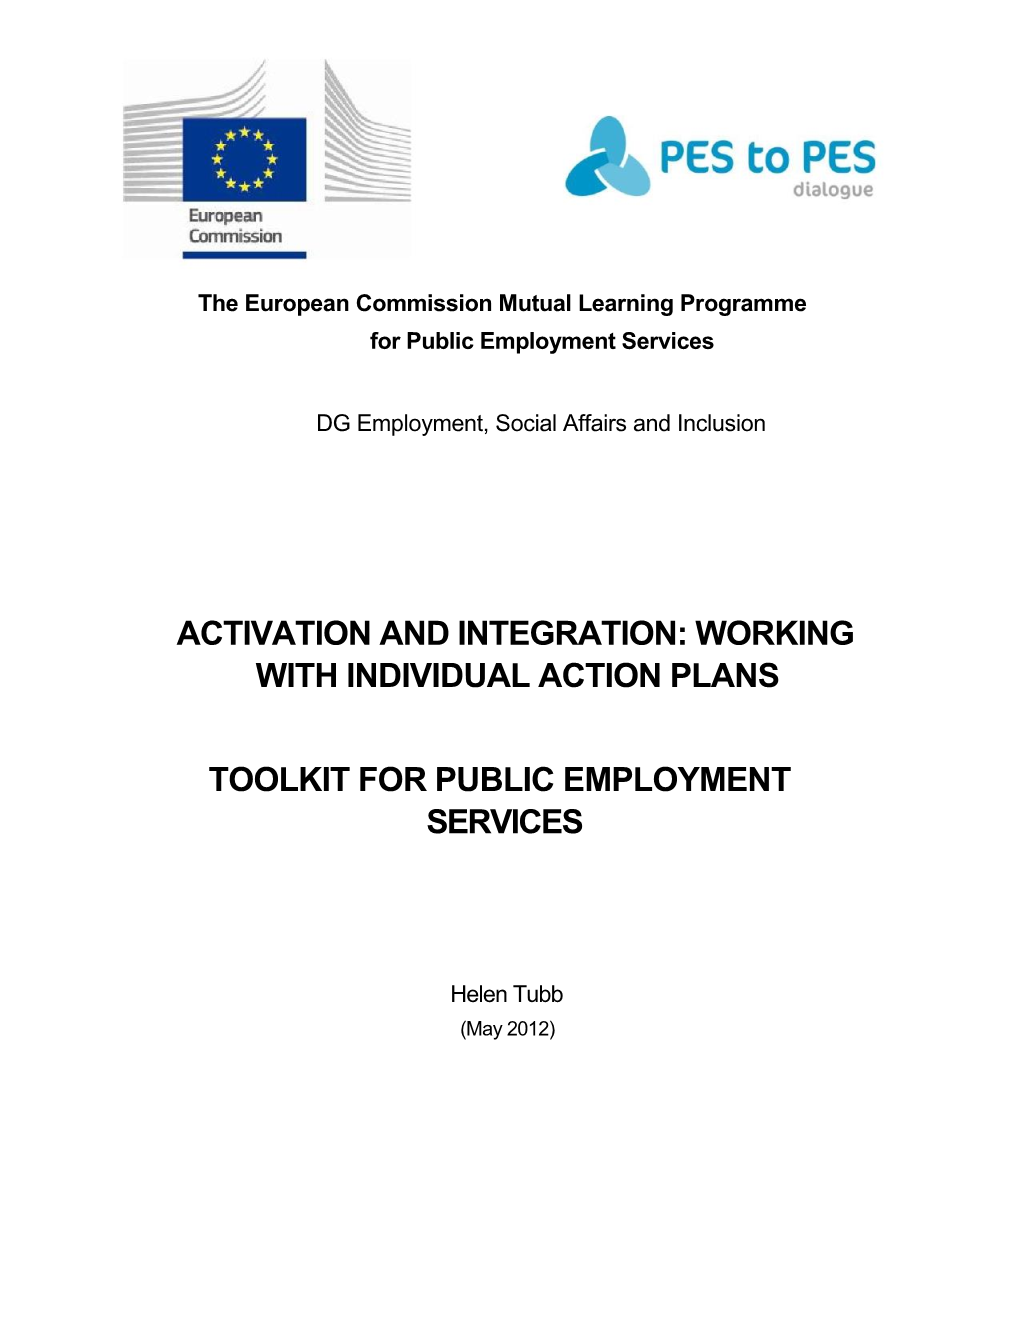 Working with Individual Action Plans Toolkit for Public Employment Services